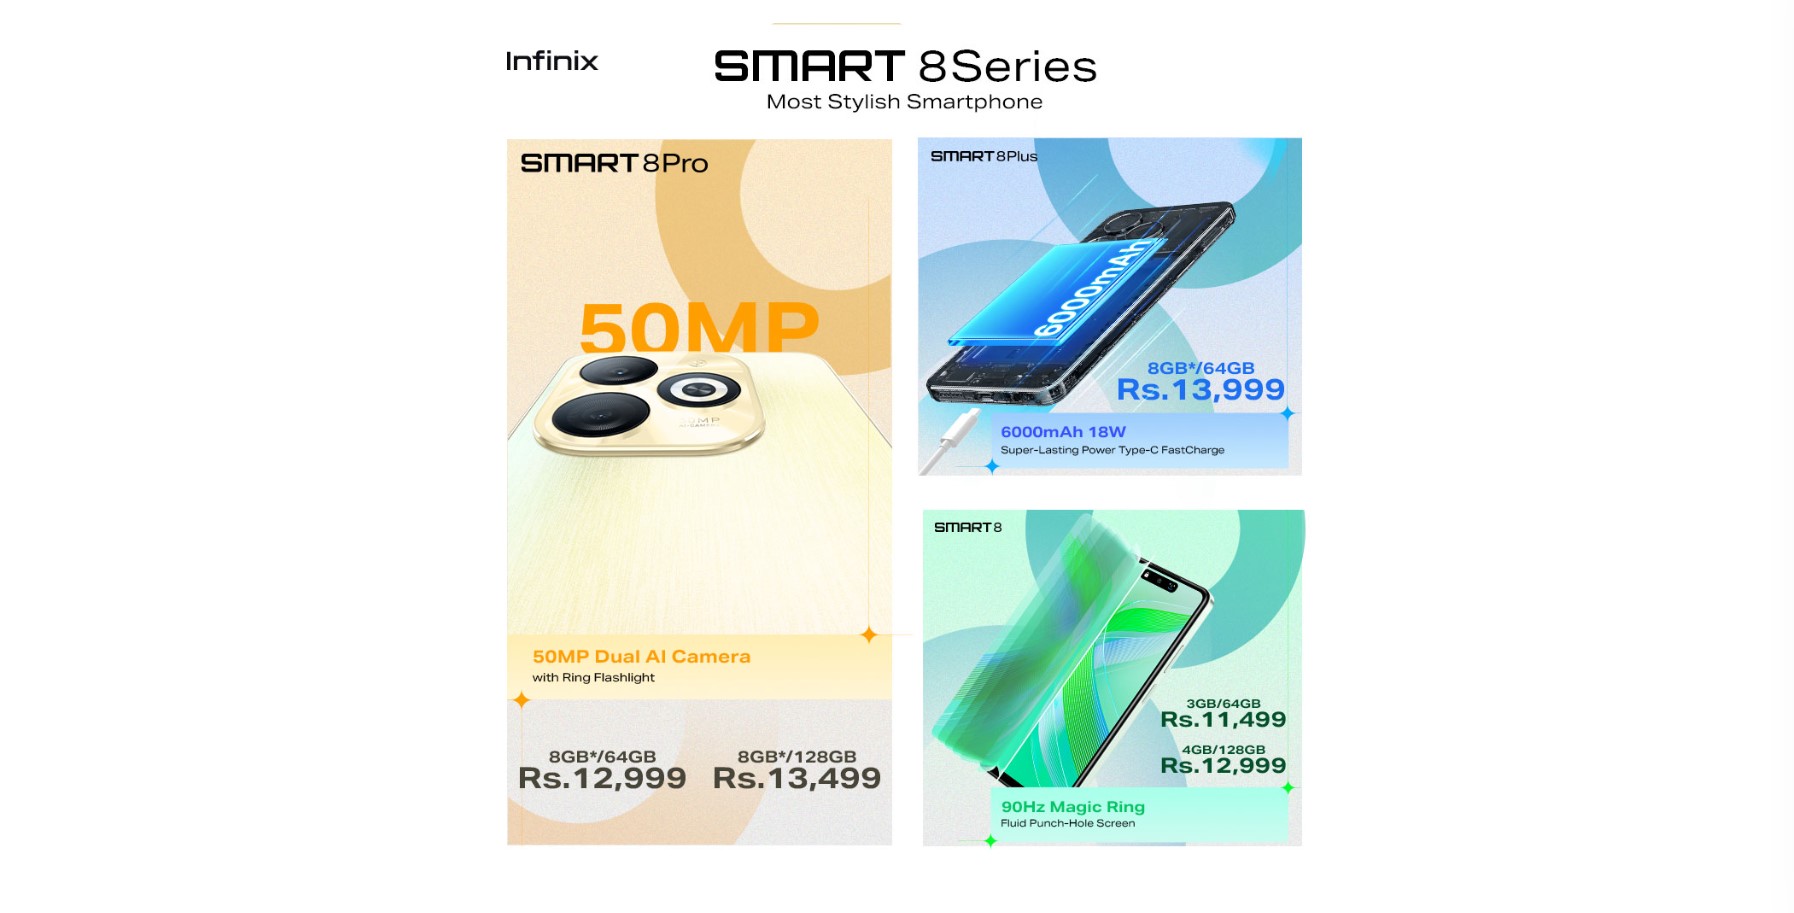 Infinix Smart 8 Series in Nepal marketed as 8GB RAM